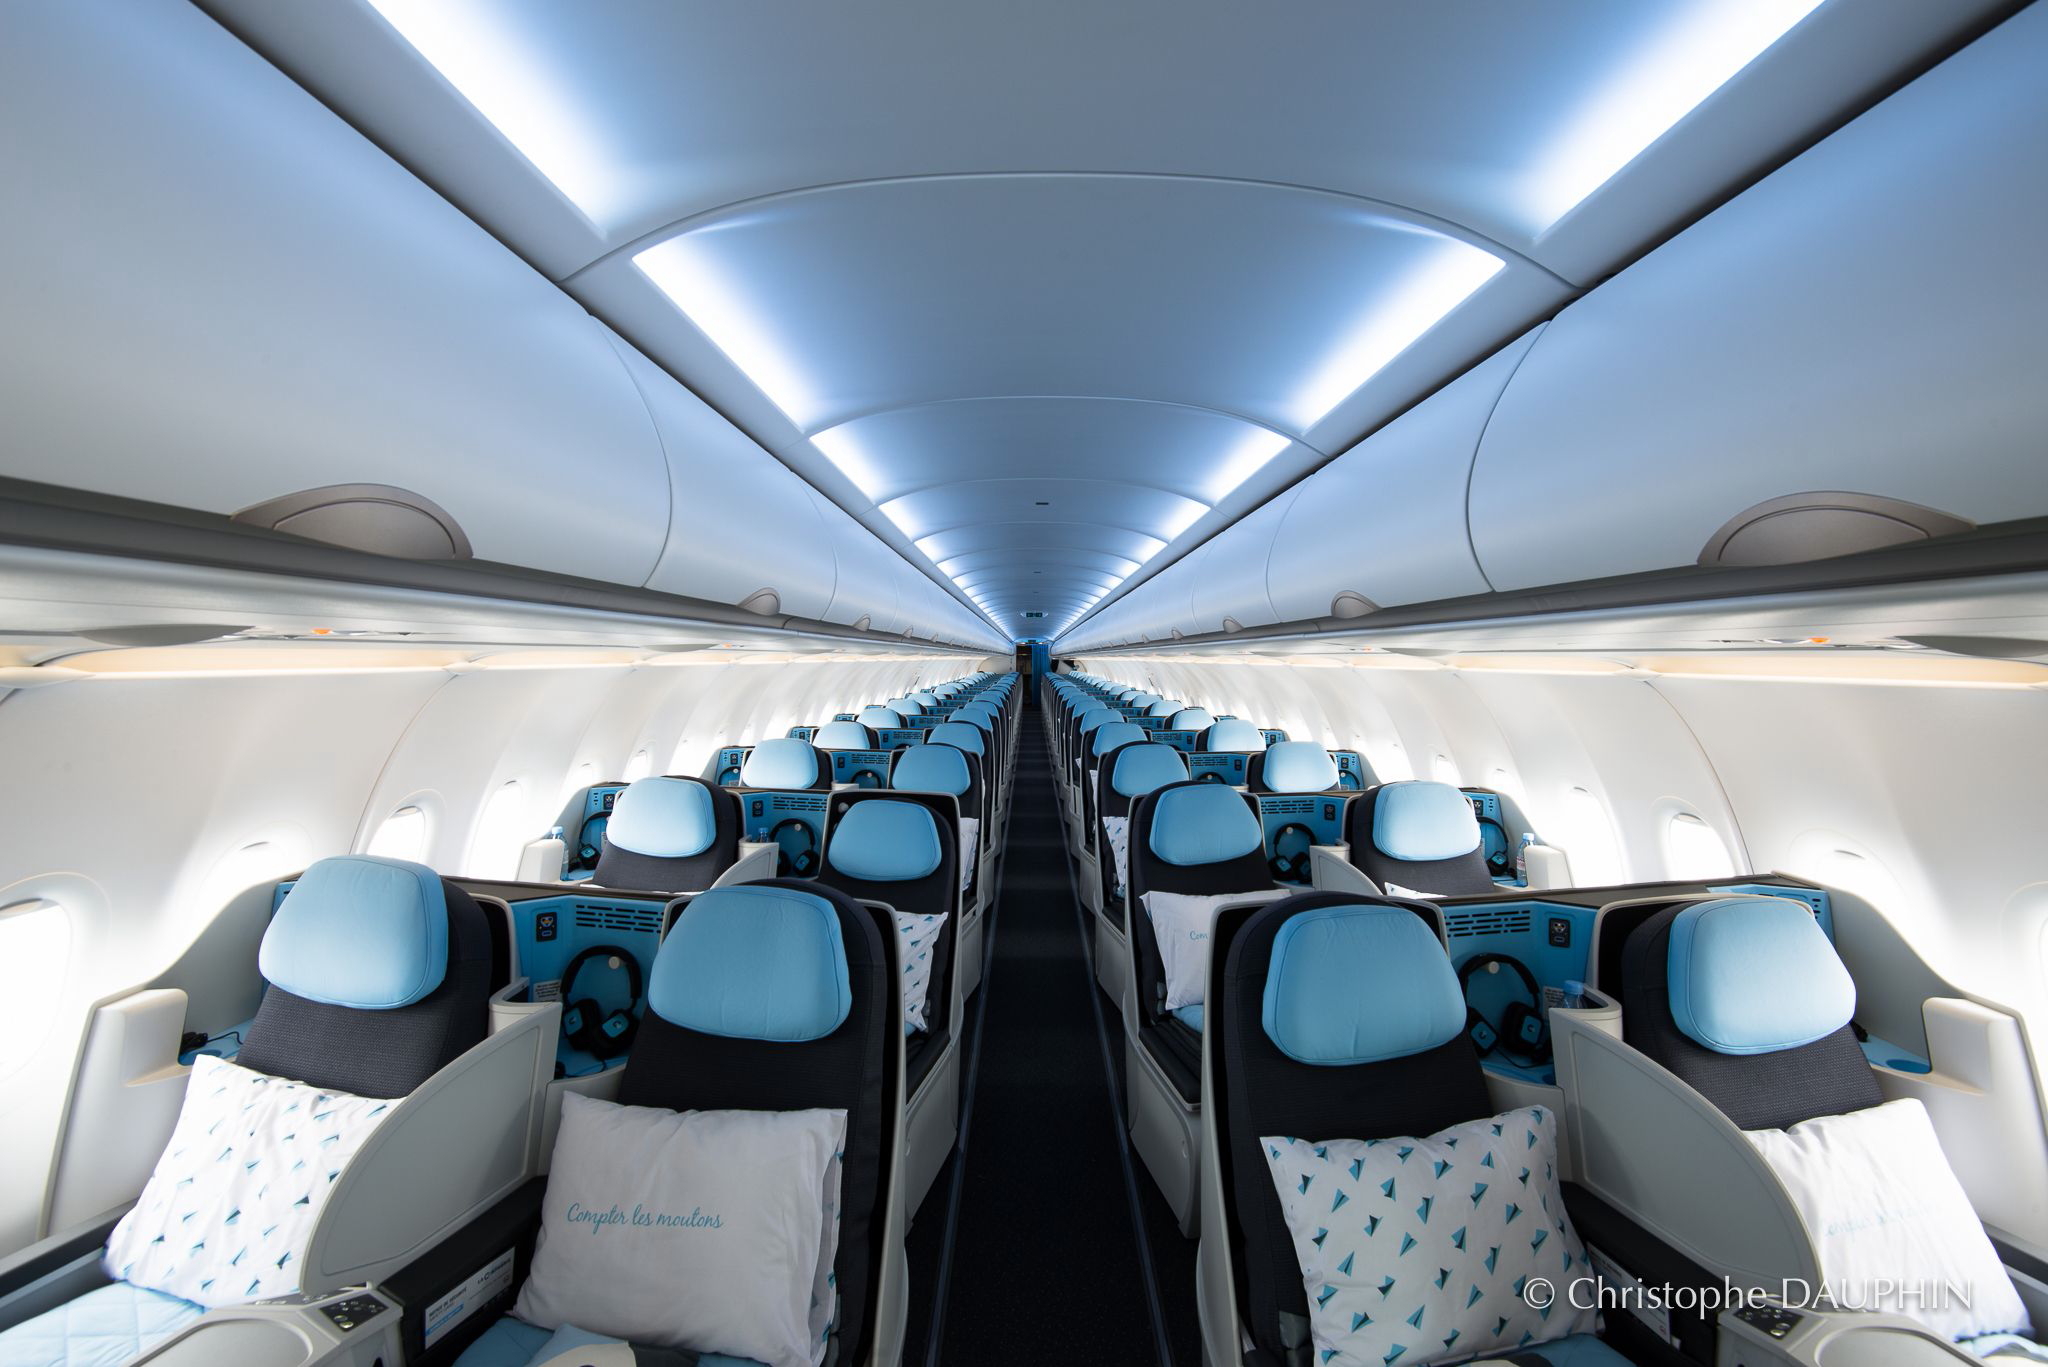 La Compagnie, an exclusively business-class French airline, has put the world's first single-aisle A321neo to work on scheduled flights between Paris Orly and Newark Liberty International Airport. Click to enlarge.